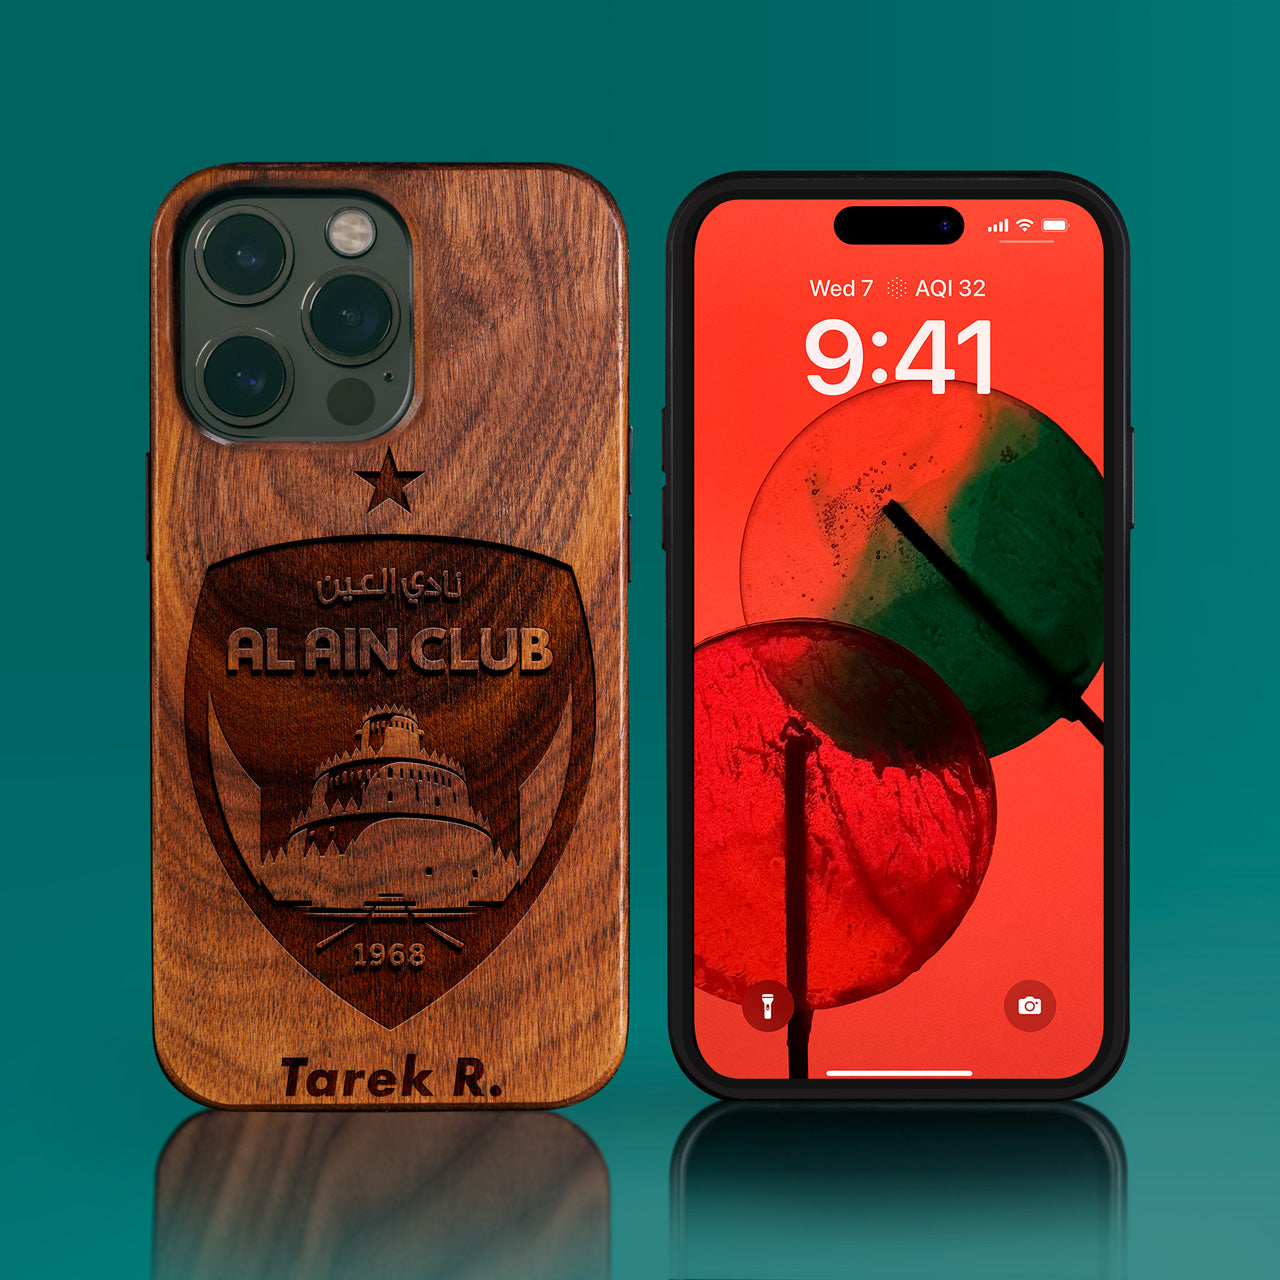 Personalized Al Ain iPhone 14/14 Pro/14 Pro Max/14 Plus Case - Carved Wood Al Ain Cover - Al Ain Birthday Christmas Gifts - iPhone 14 Case - Custom Al Ain Gift For Him - Al Ain Gifts For Men - 2022 Al Ain FC Christmas Gifts - Carved Wood Custom Abu Dhabi UAE Football Gift For Him - Monogrammed unusual Abu Dhabi football gifts iPhone 14 | iPhone 14 Pro | 14 Plus Covers | iPhone 13 | iPhone 13 Pro | iPhone 13 Pro Max | iPhone 12 Pro Max | iPhone 12 By by Engraved In Nature